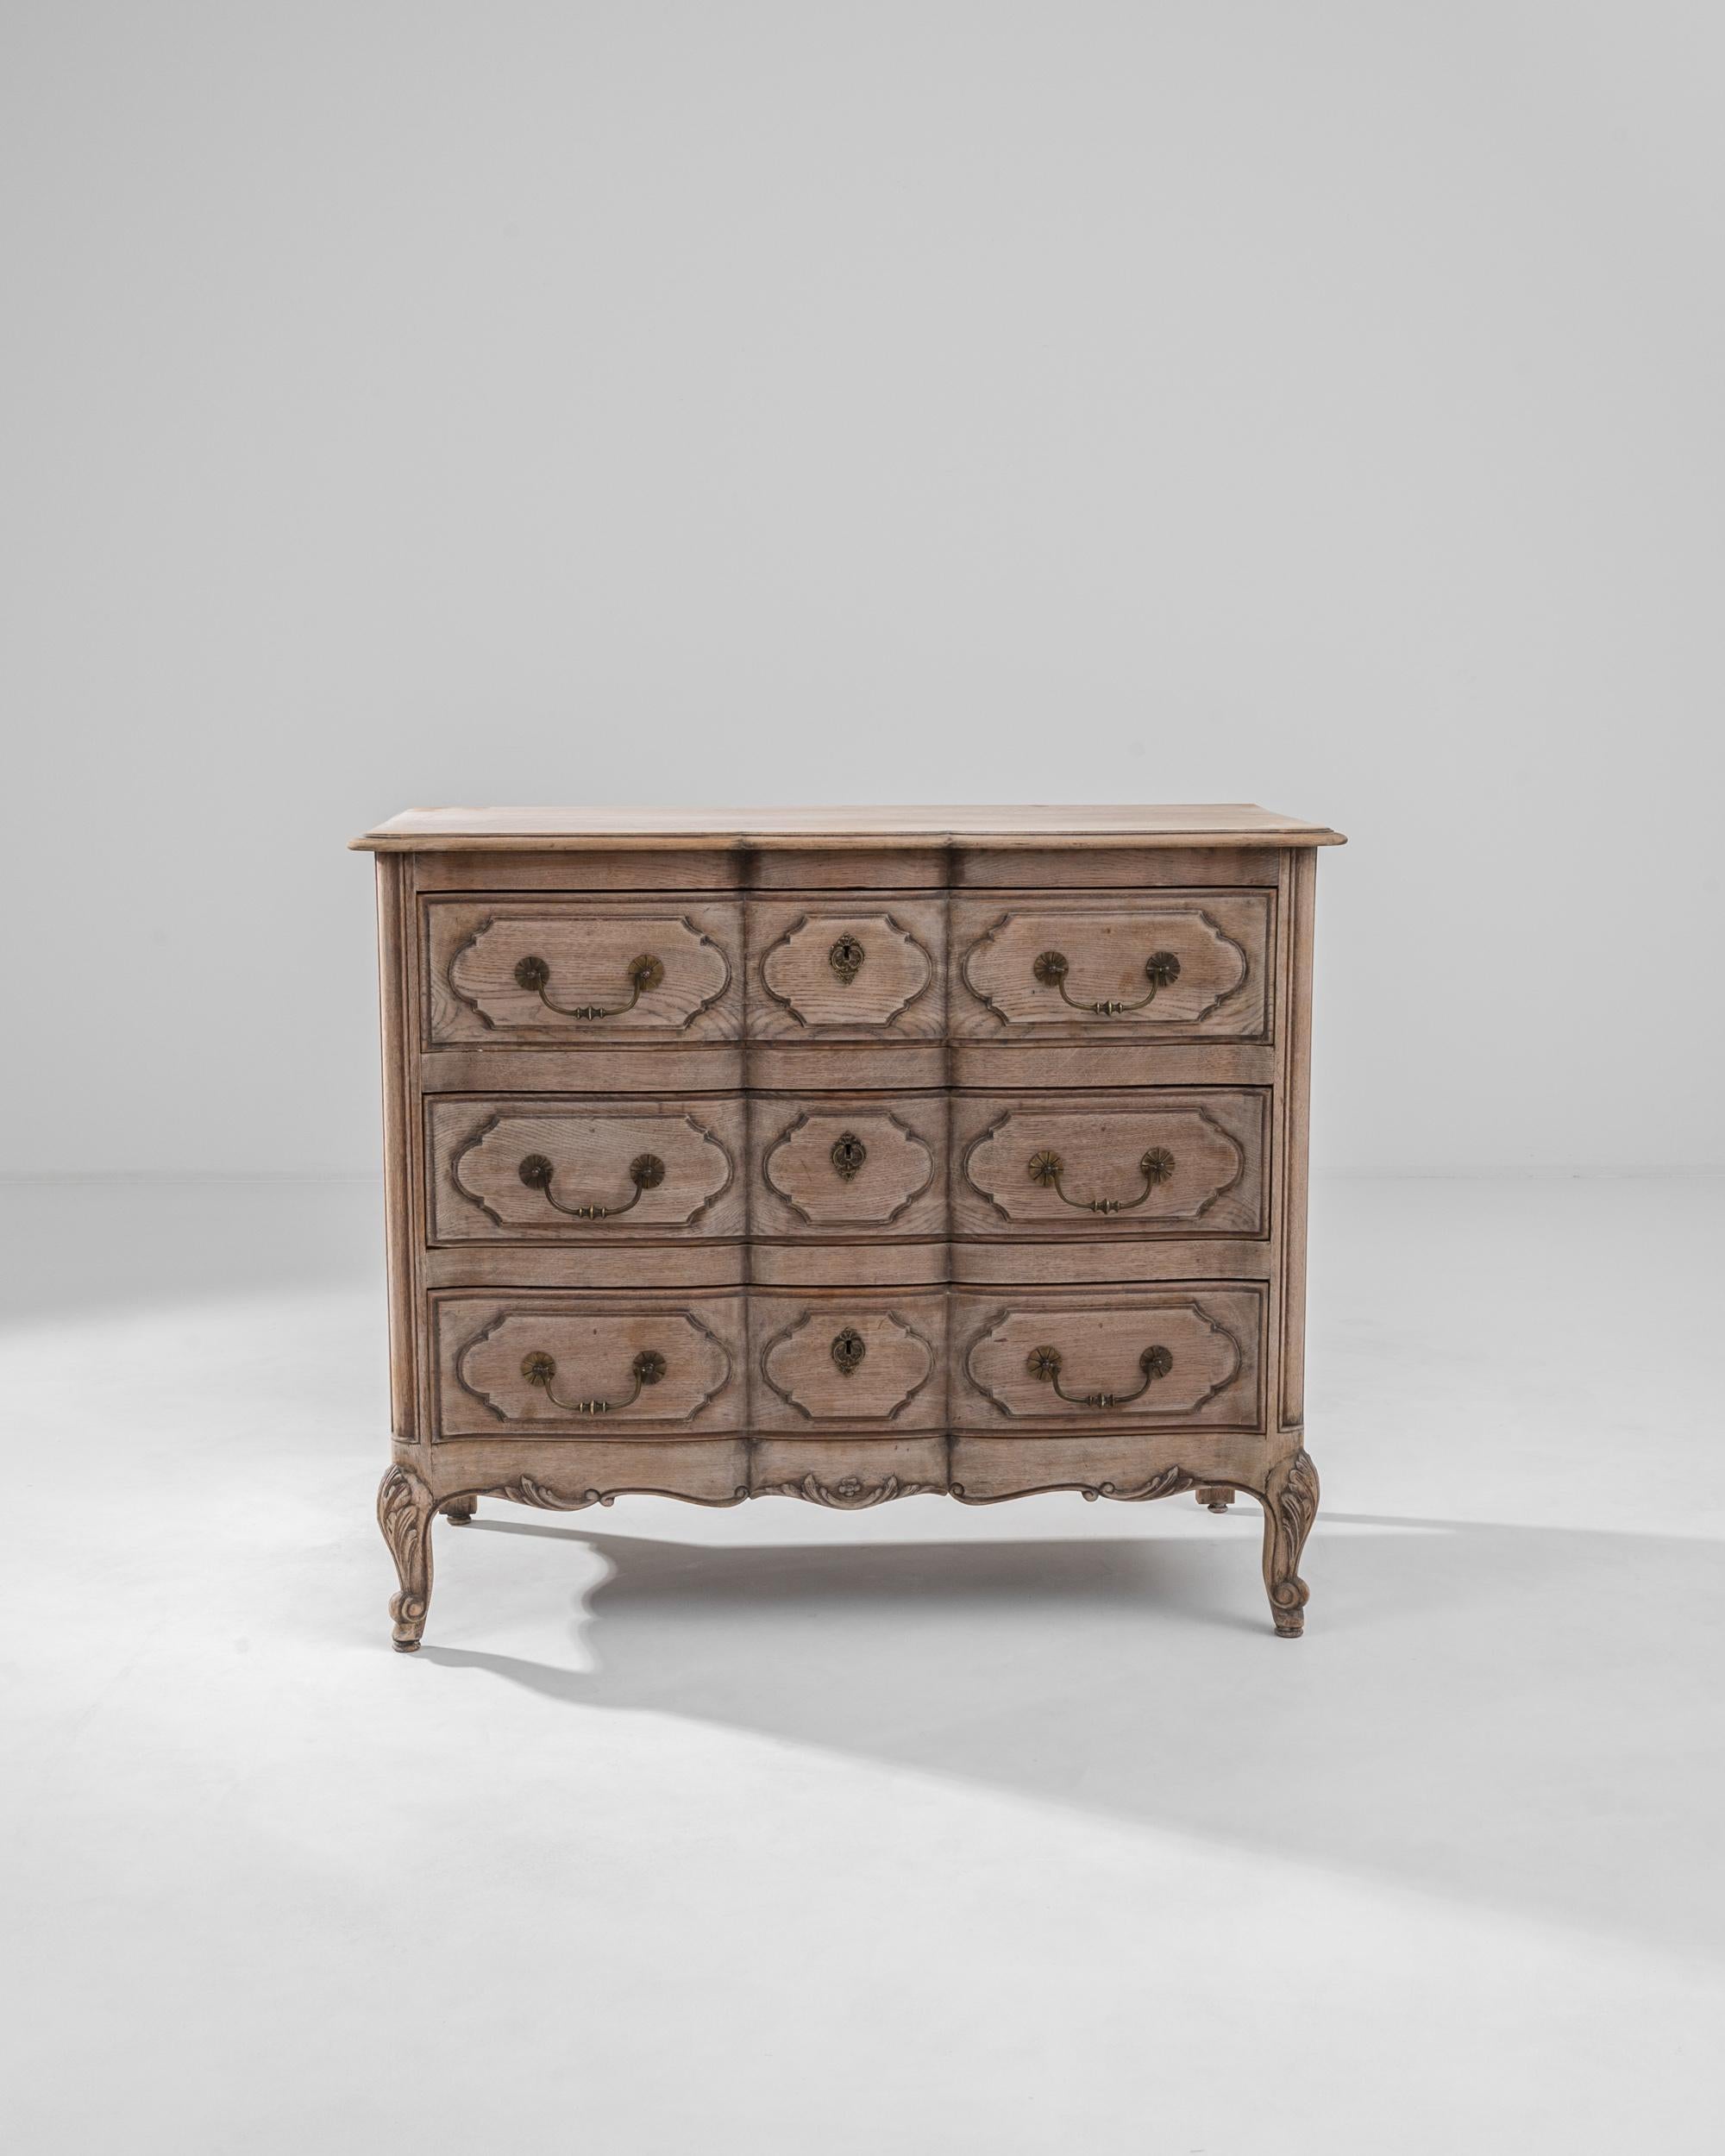 Embark on a journey of timeless elegance with this 20th Century Belgian Bleached Oak Chest of Drawers. Standing gracefully on cabriole legs, this chest is a testament to exquisite craftsmanship and ornate detailing. The bleached oak finish lends it